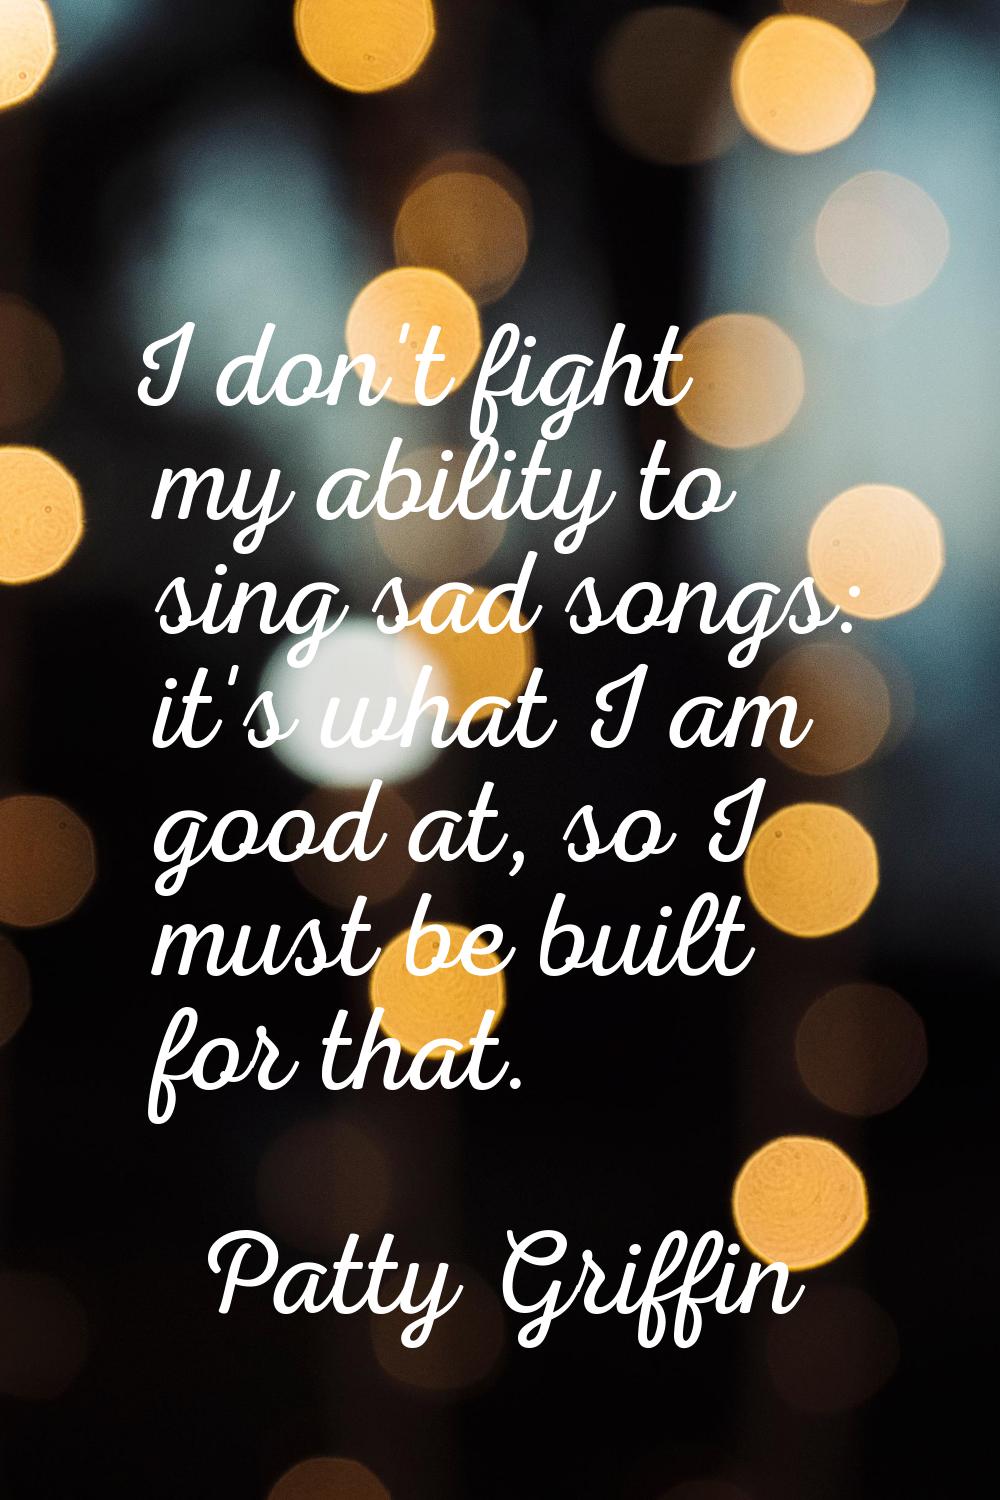 I don't fight my ability to sing sad songs: it's what I am good at, so I must be built for that.